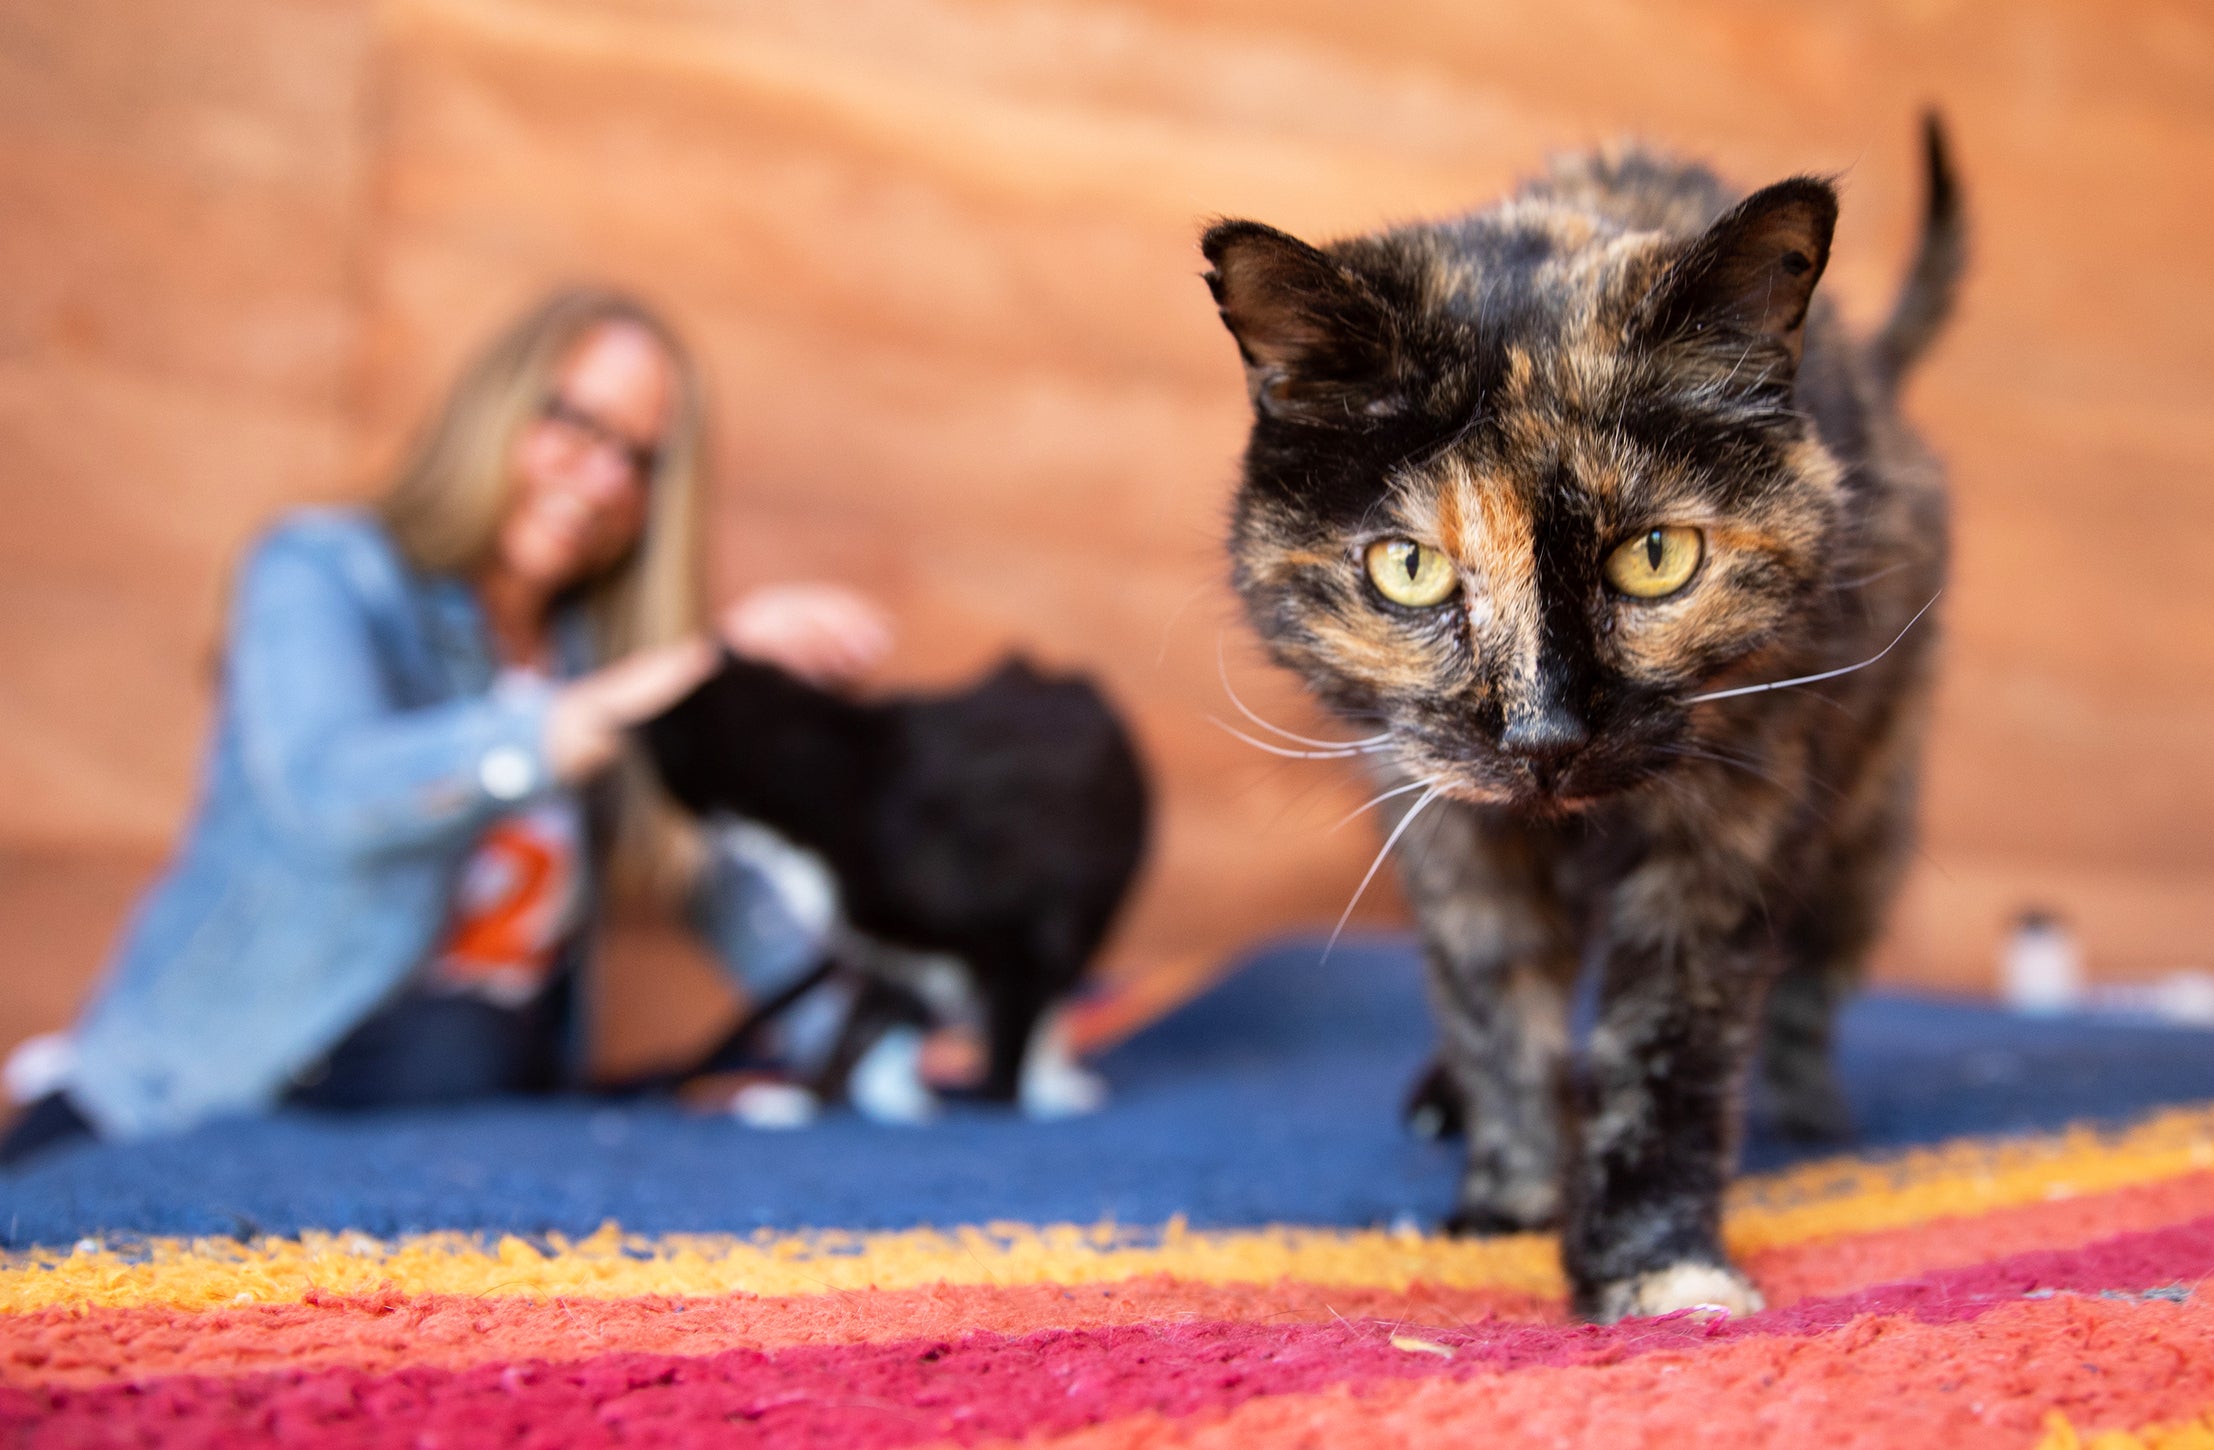 Tortoiseshell cat in foreground with Best Friends CEO petting another cat in the background